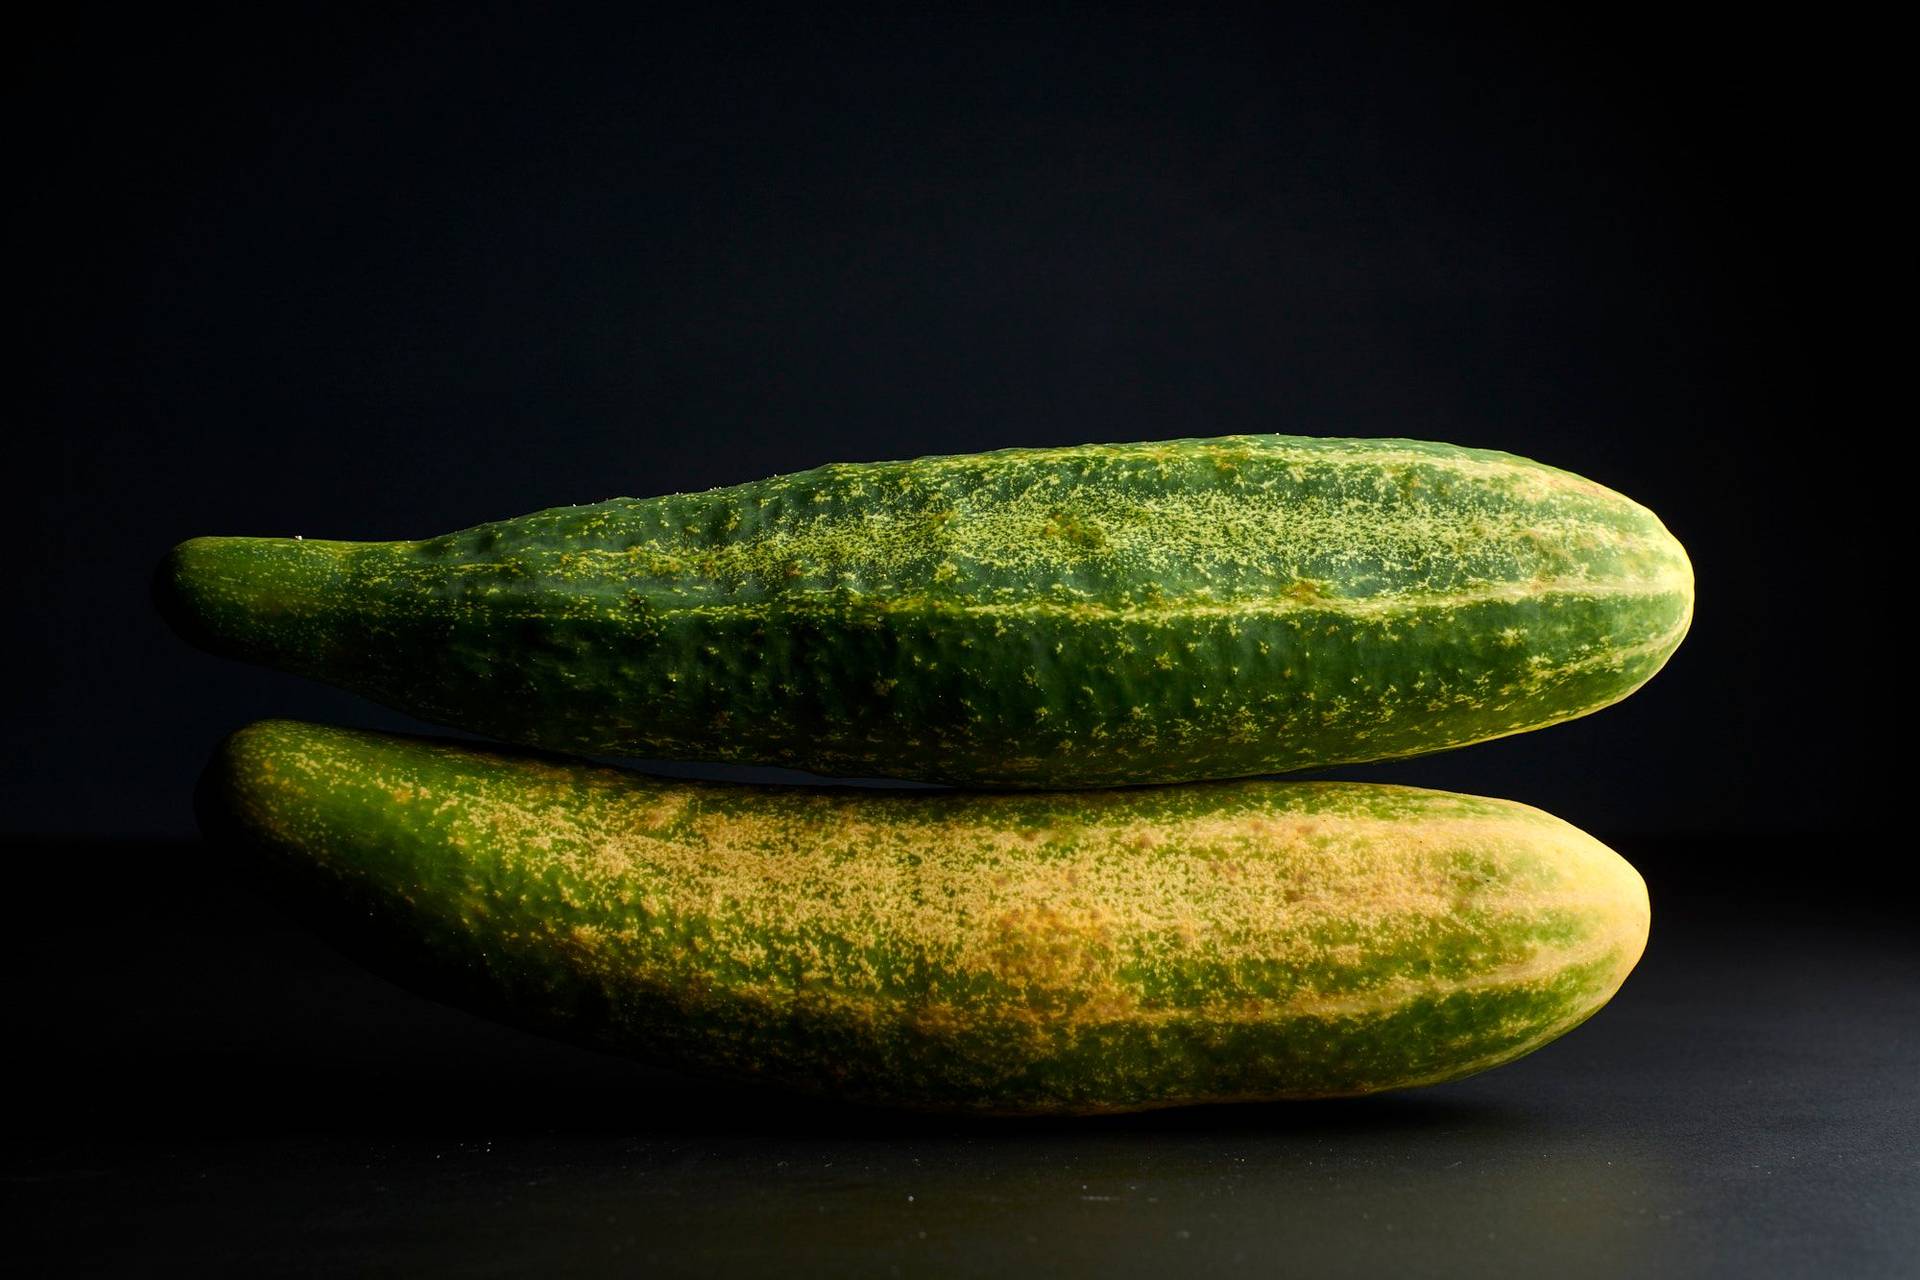 two cucumbers on black background